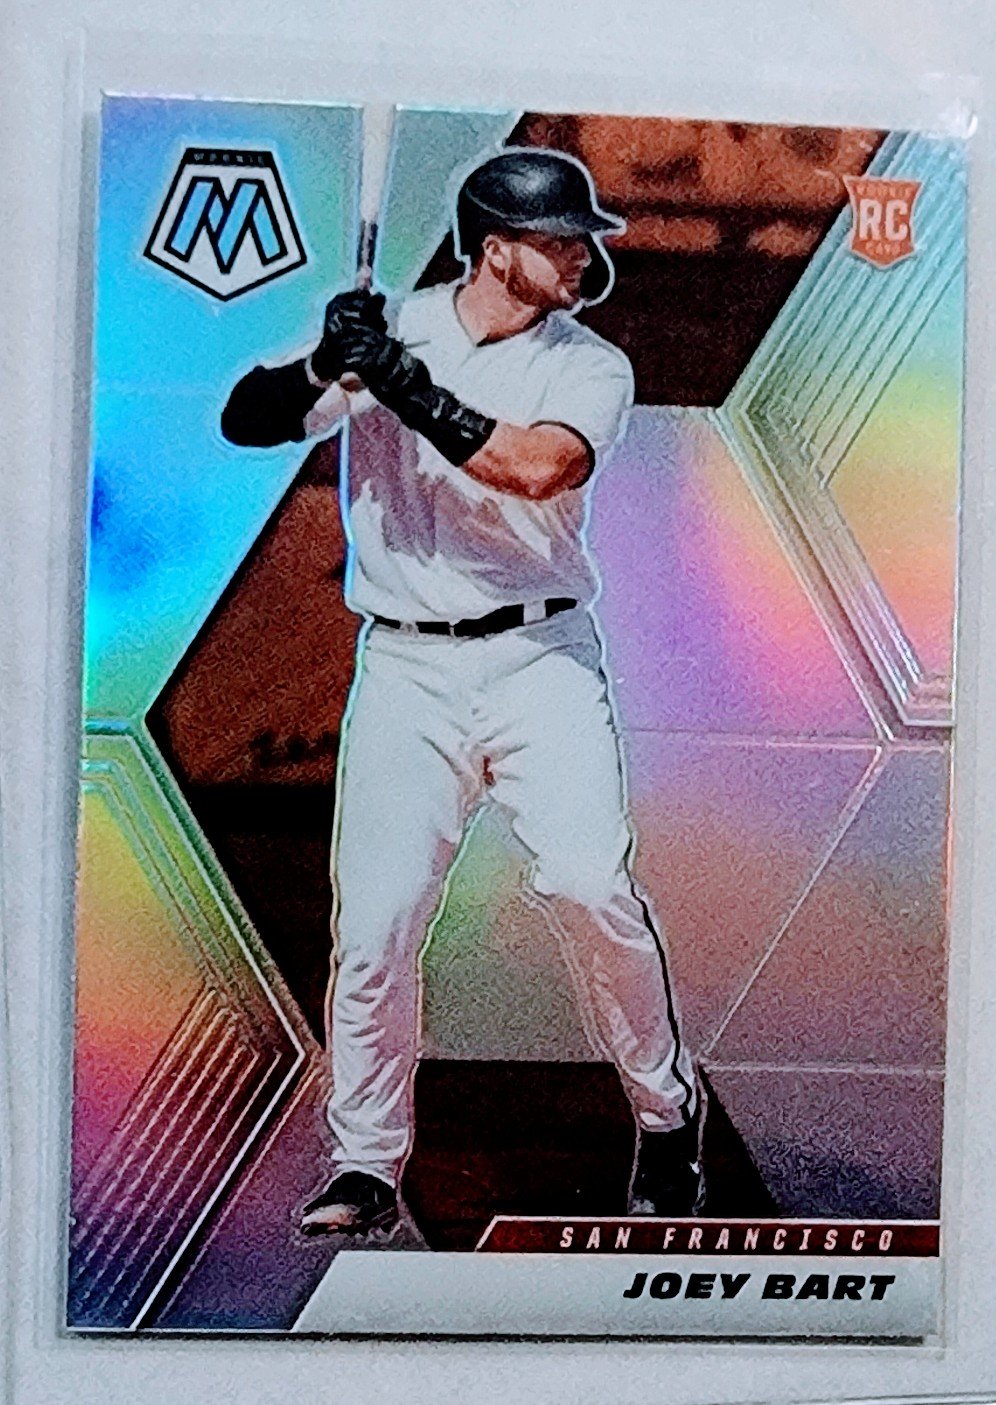 2021 Panini Mosaic Joey Bart Rookie Refractor Baseball Card AVM1 simple Xclusive Collectibles   